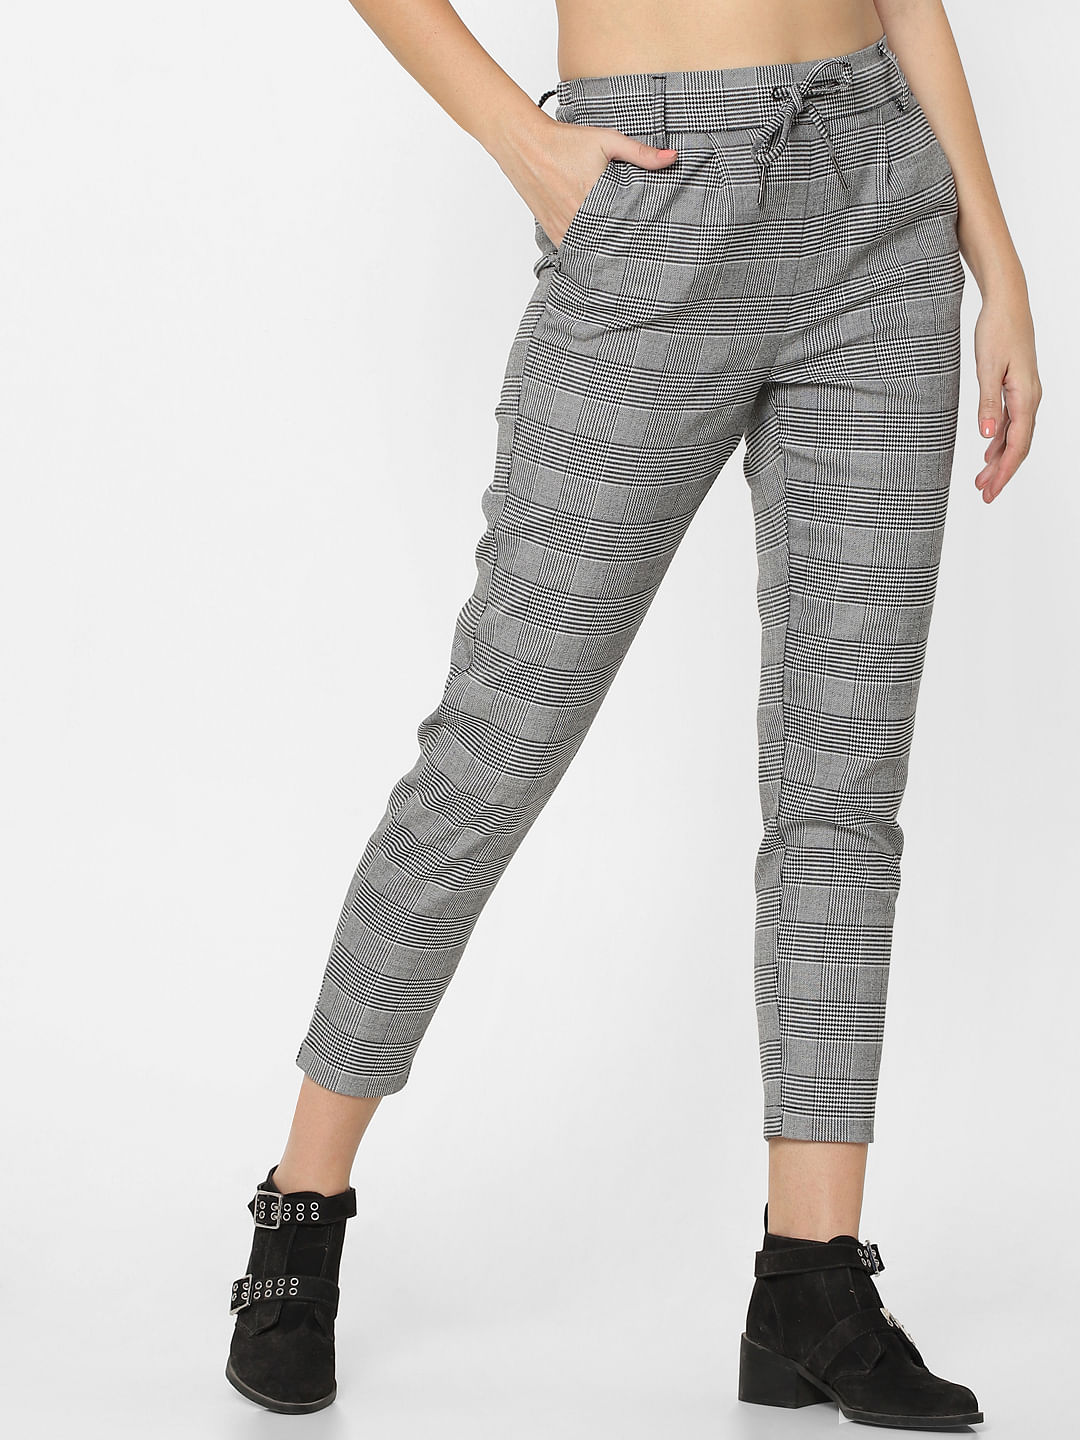 Buy Black and White Essential Comfort Check Formal Pants Online   FableStreet